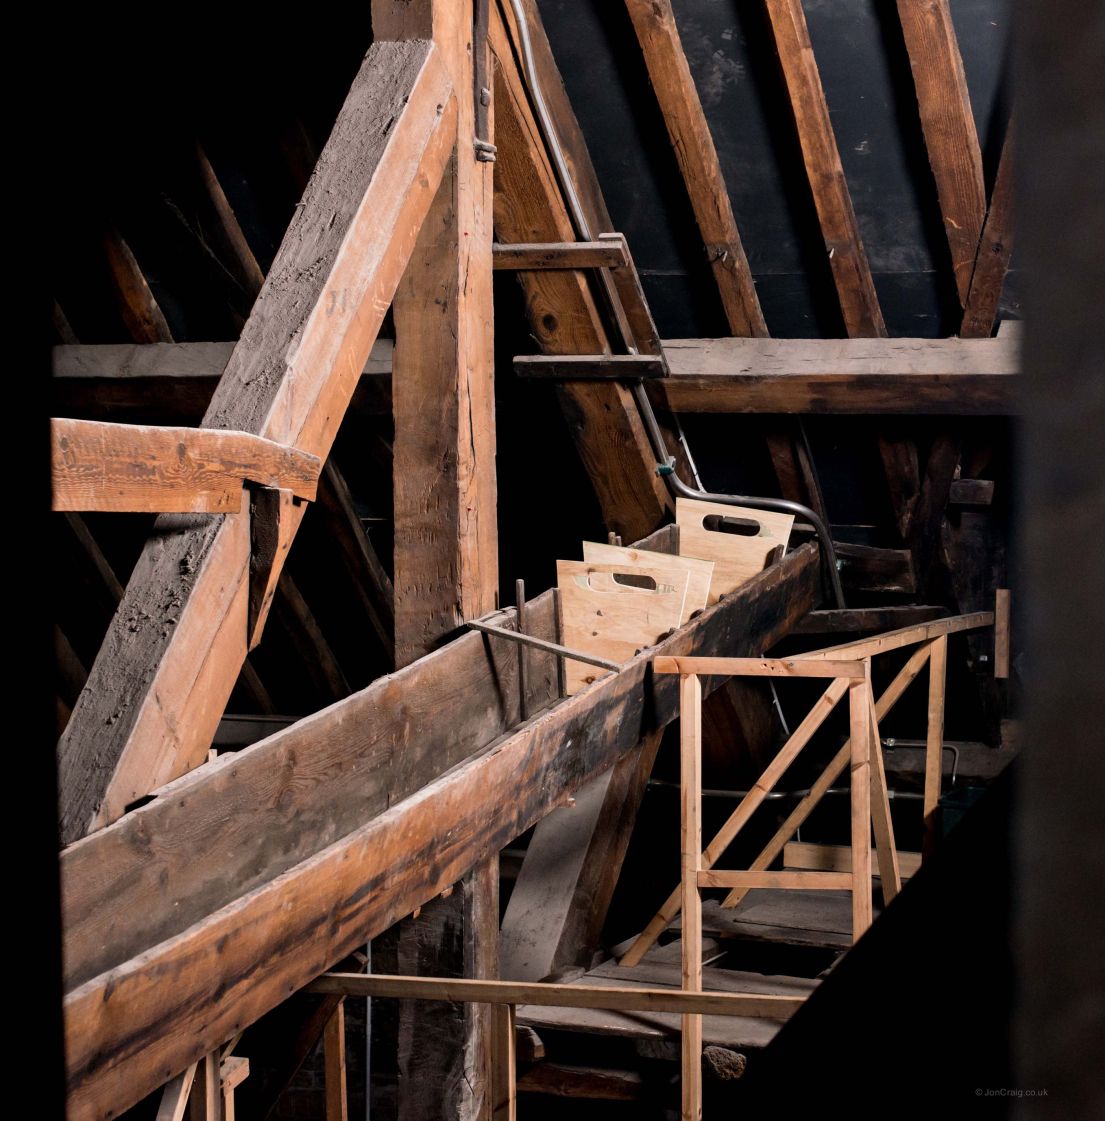 A long wooden contraption in the roof eves of an attic.